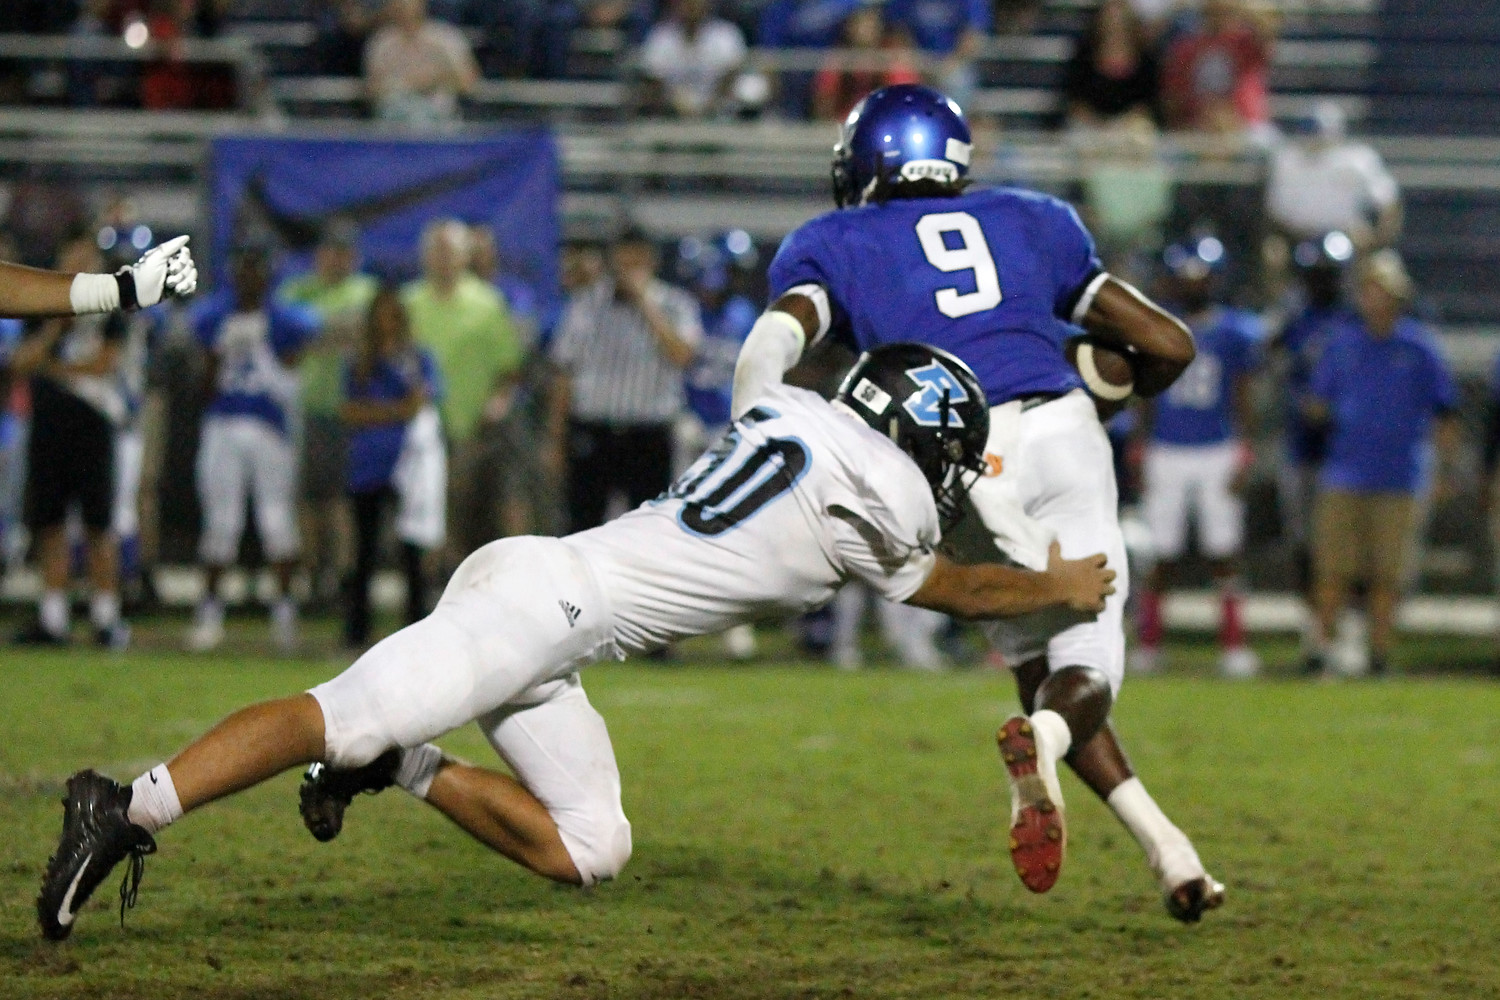 Daniel Lichlyter makes the tackle for the Sharks.